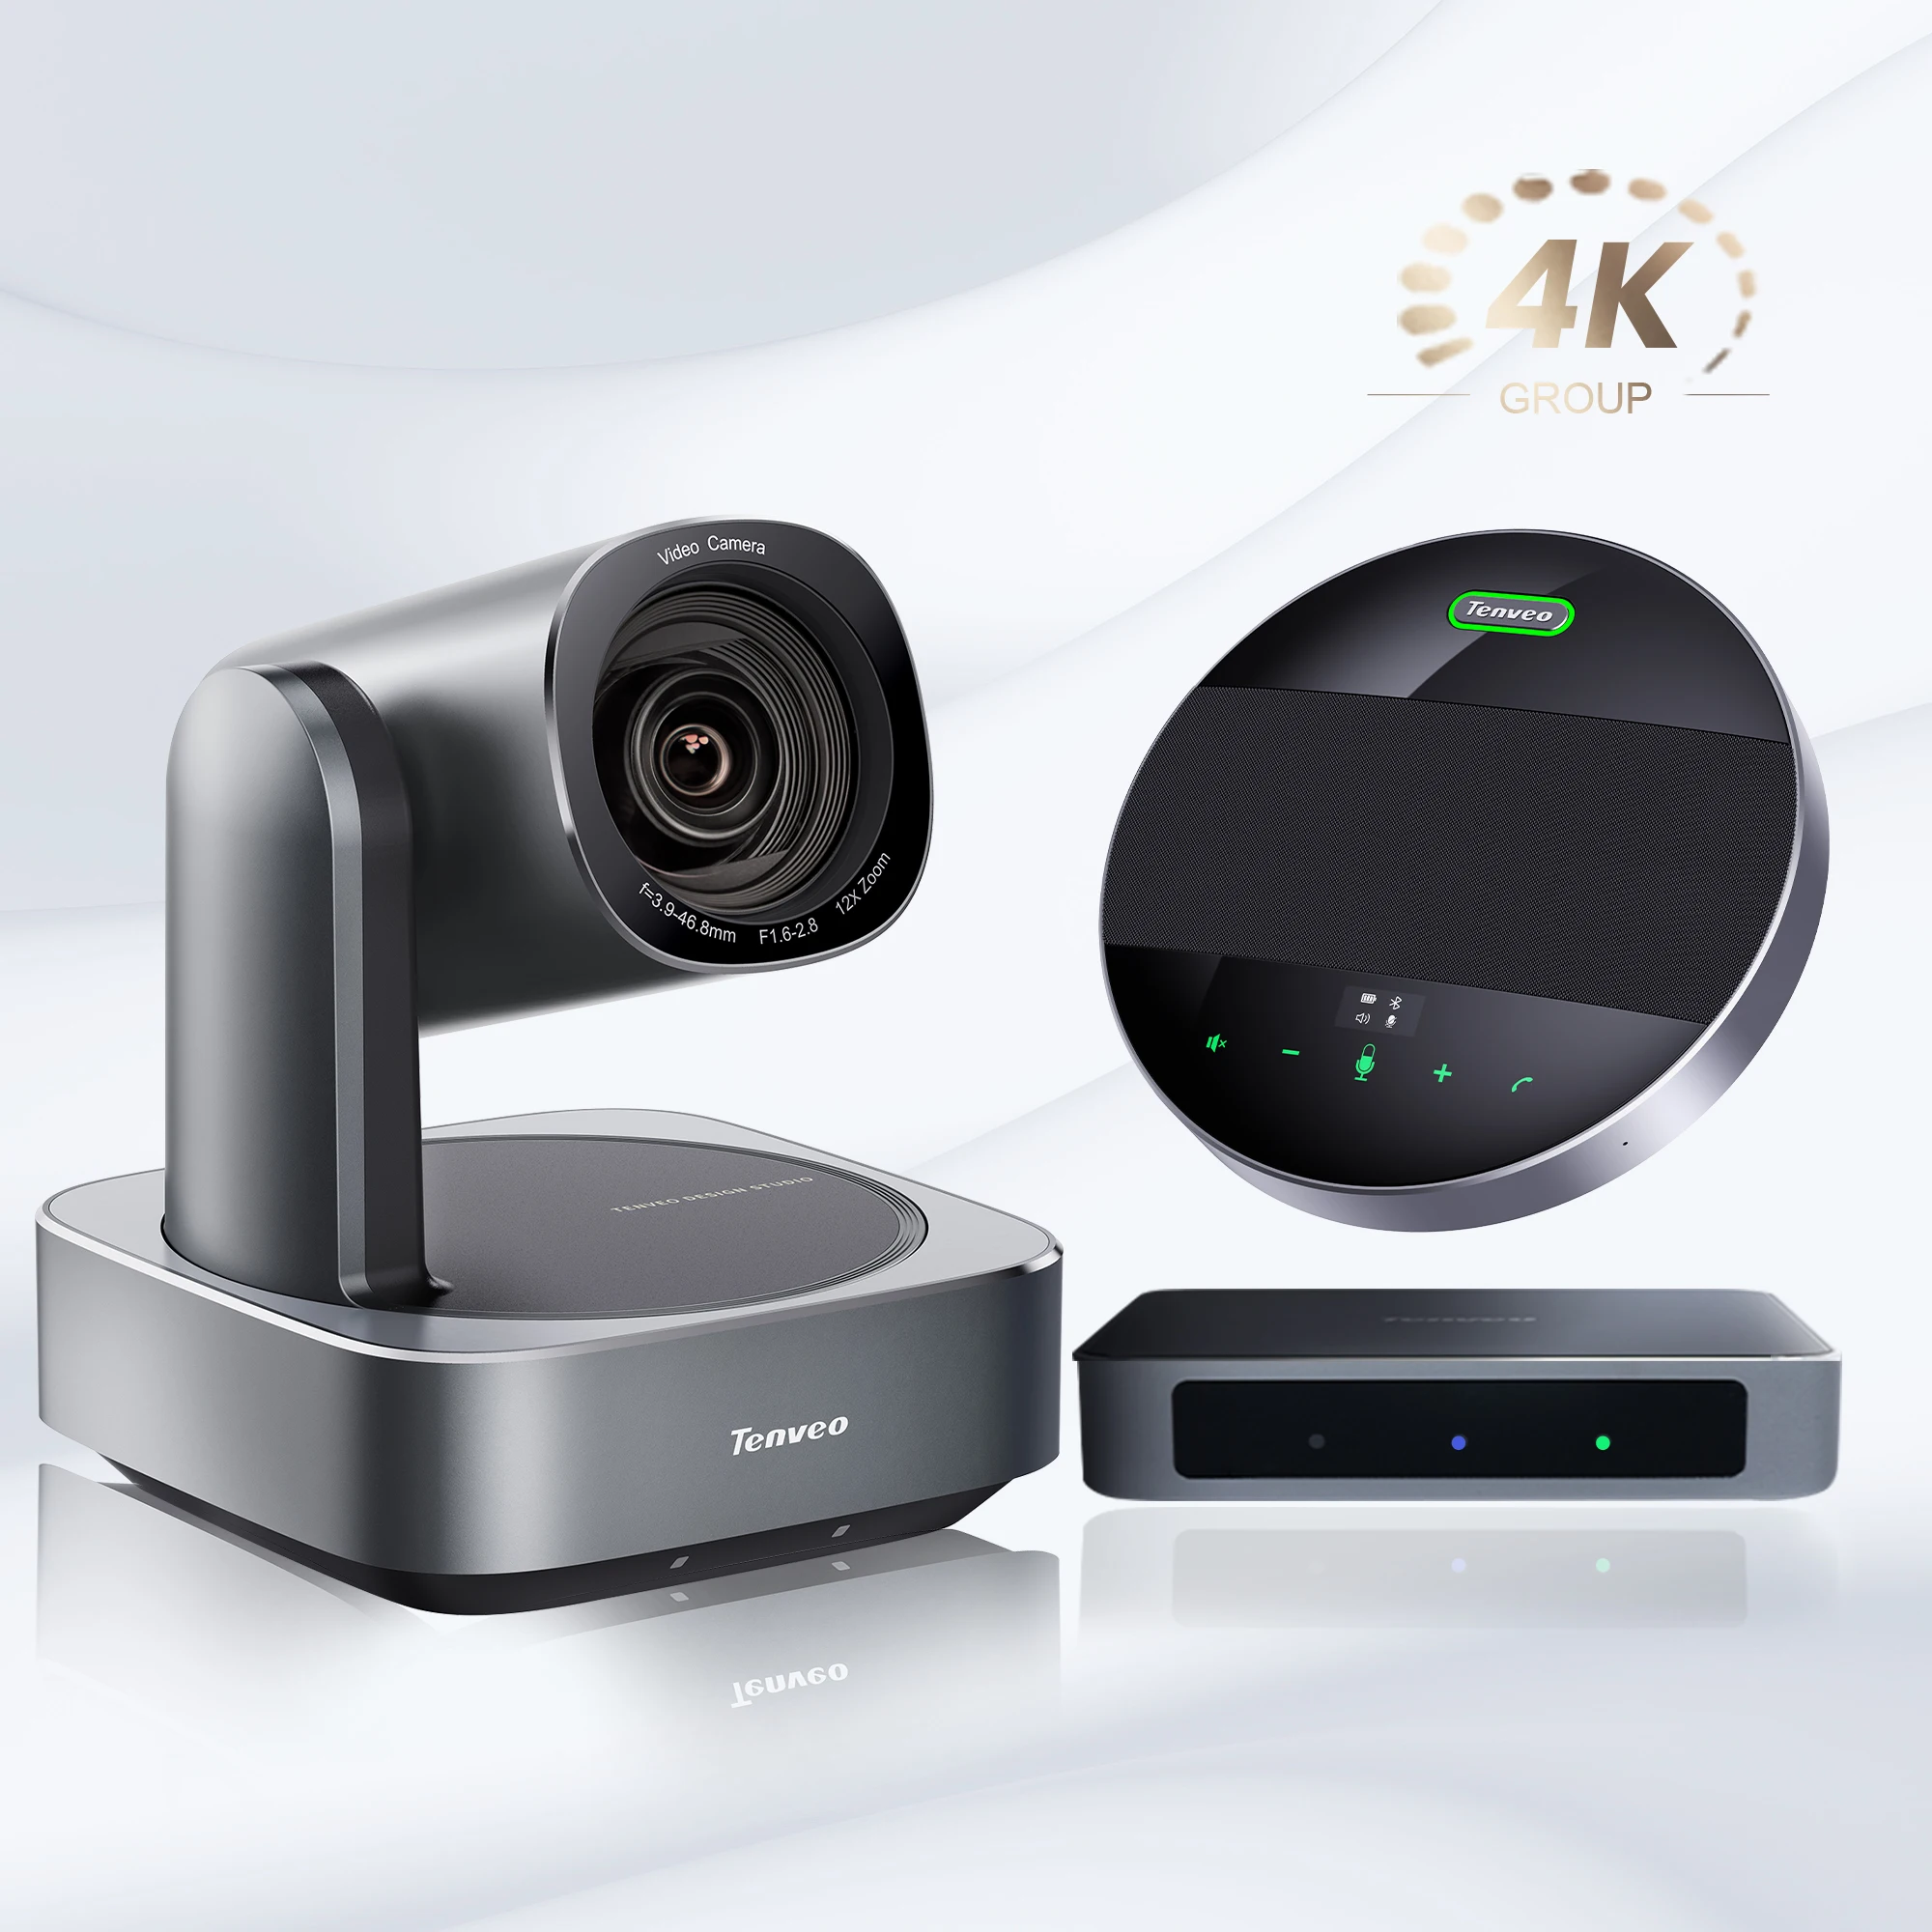 

12x zoom with speakerphones affordable video conferencing group for mid to large-sized meeting rooms